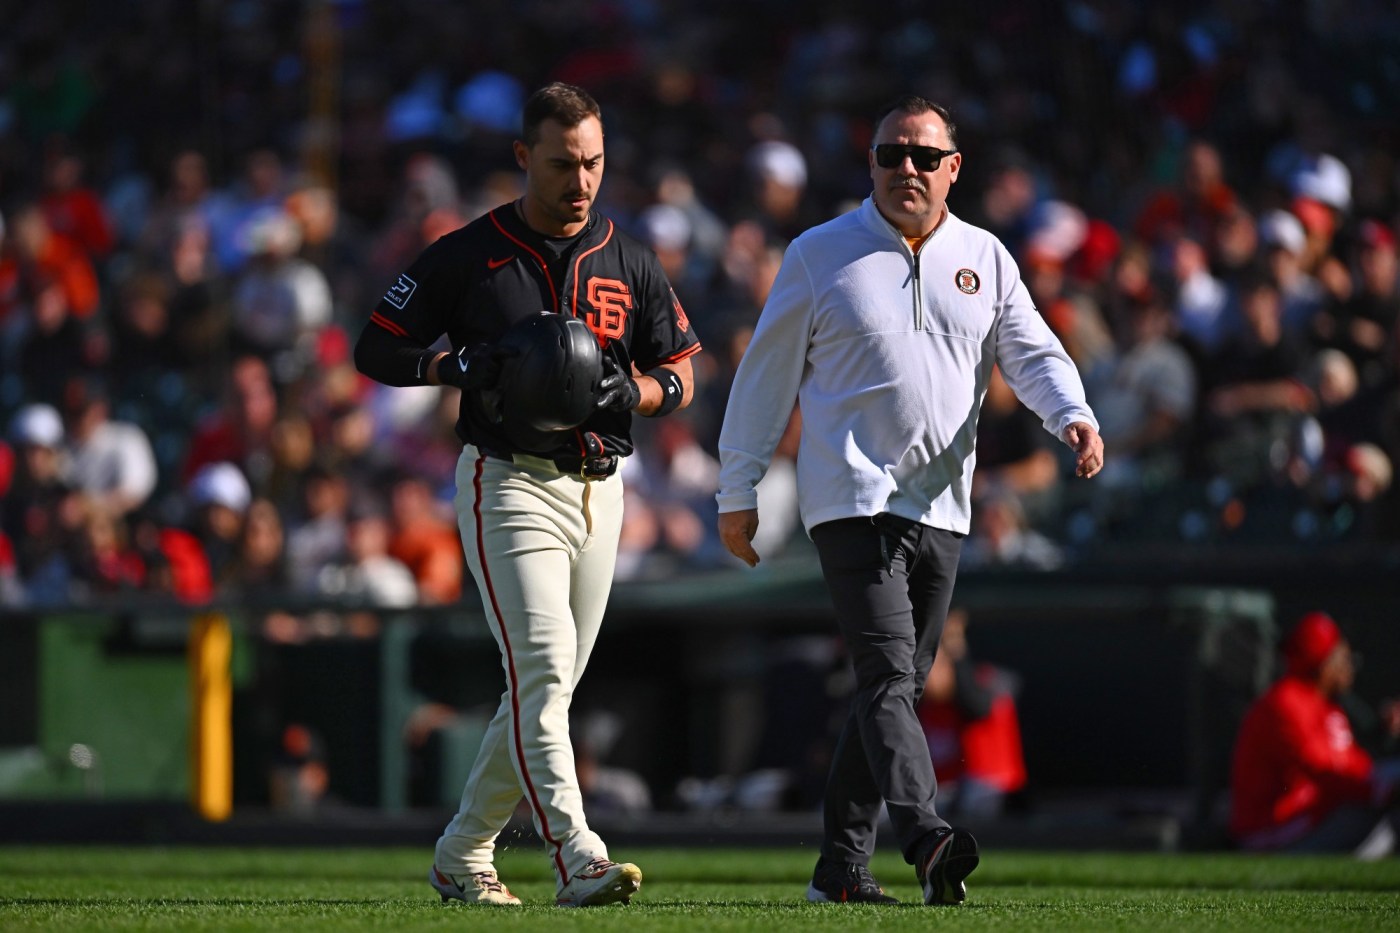 injuries-begin-to-pile-up-for-sf-giants-as-michael-conforto-lands-on-il